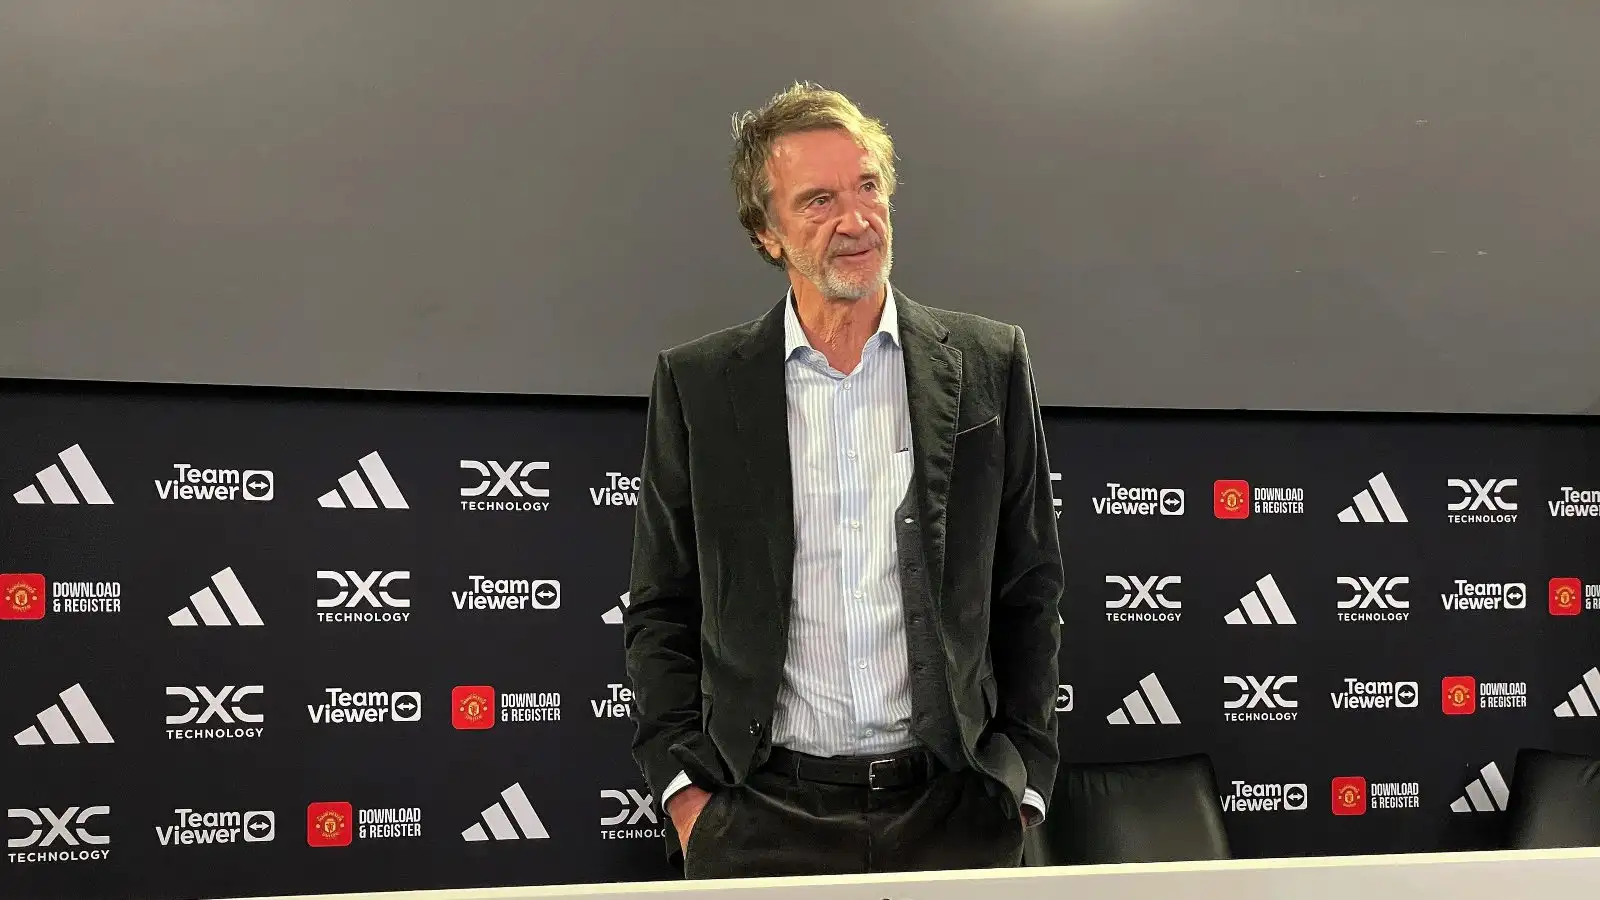 Incoming Male Utd part-owner Sir Jim Ratcliffe